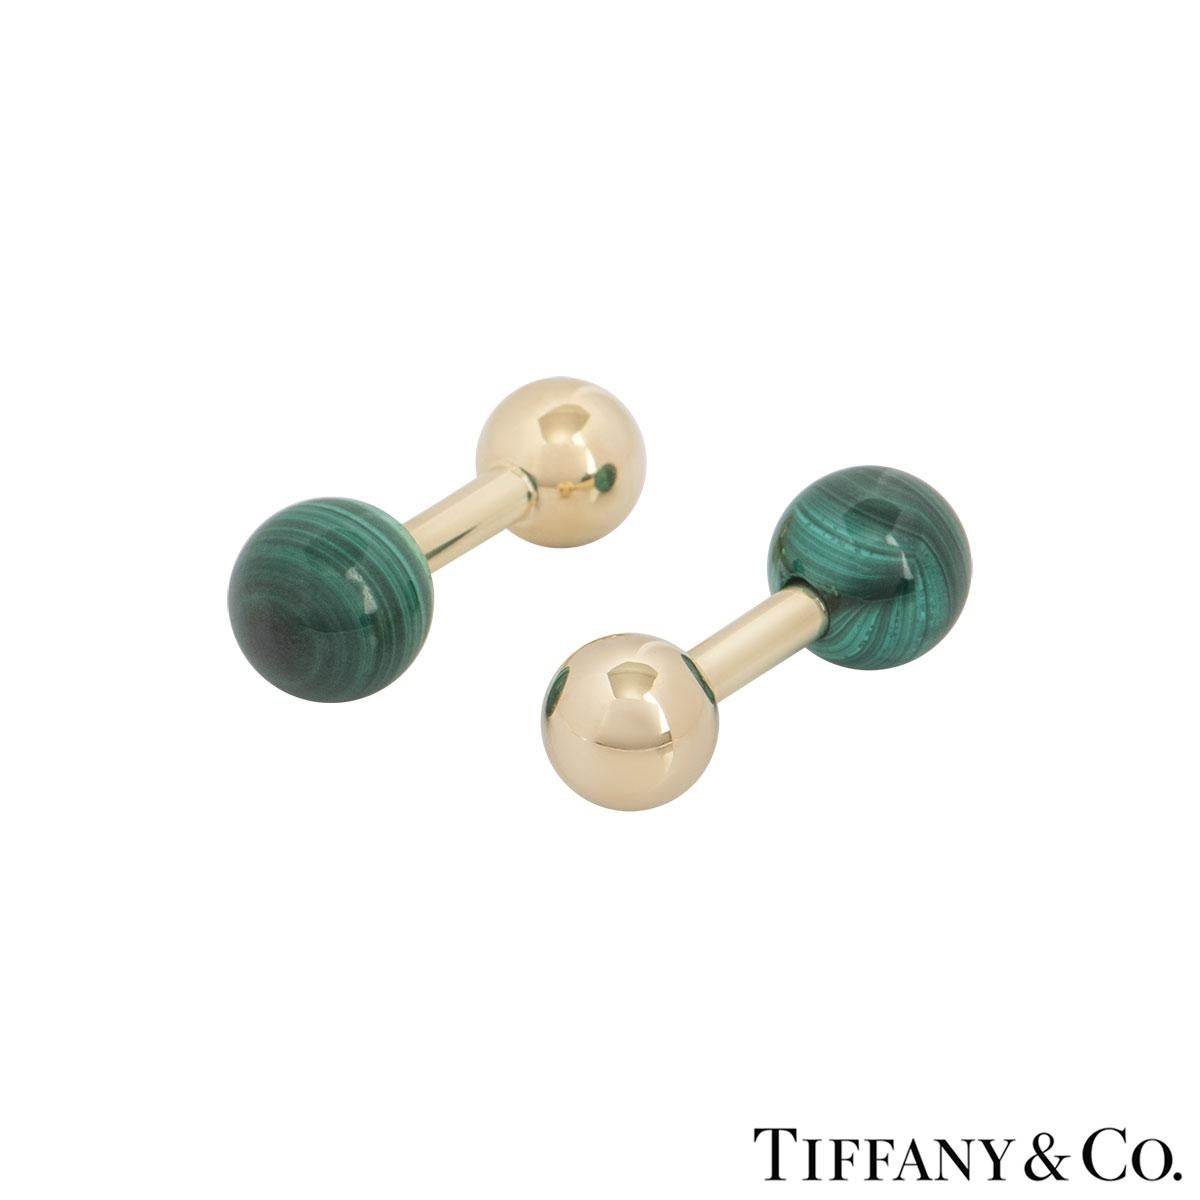 A pair of 14k yellow gold malachite ball cufflinks by Tiffany & Co. The cufflinks each feature a malachite bead on one end and a yellow gold polished ball on the other. The cufflinks are encased together by a bar fitting with a length of 2.70cm with